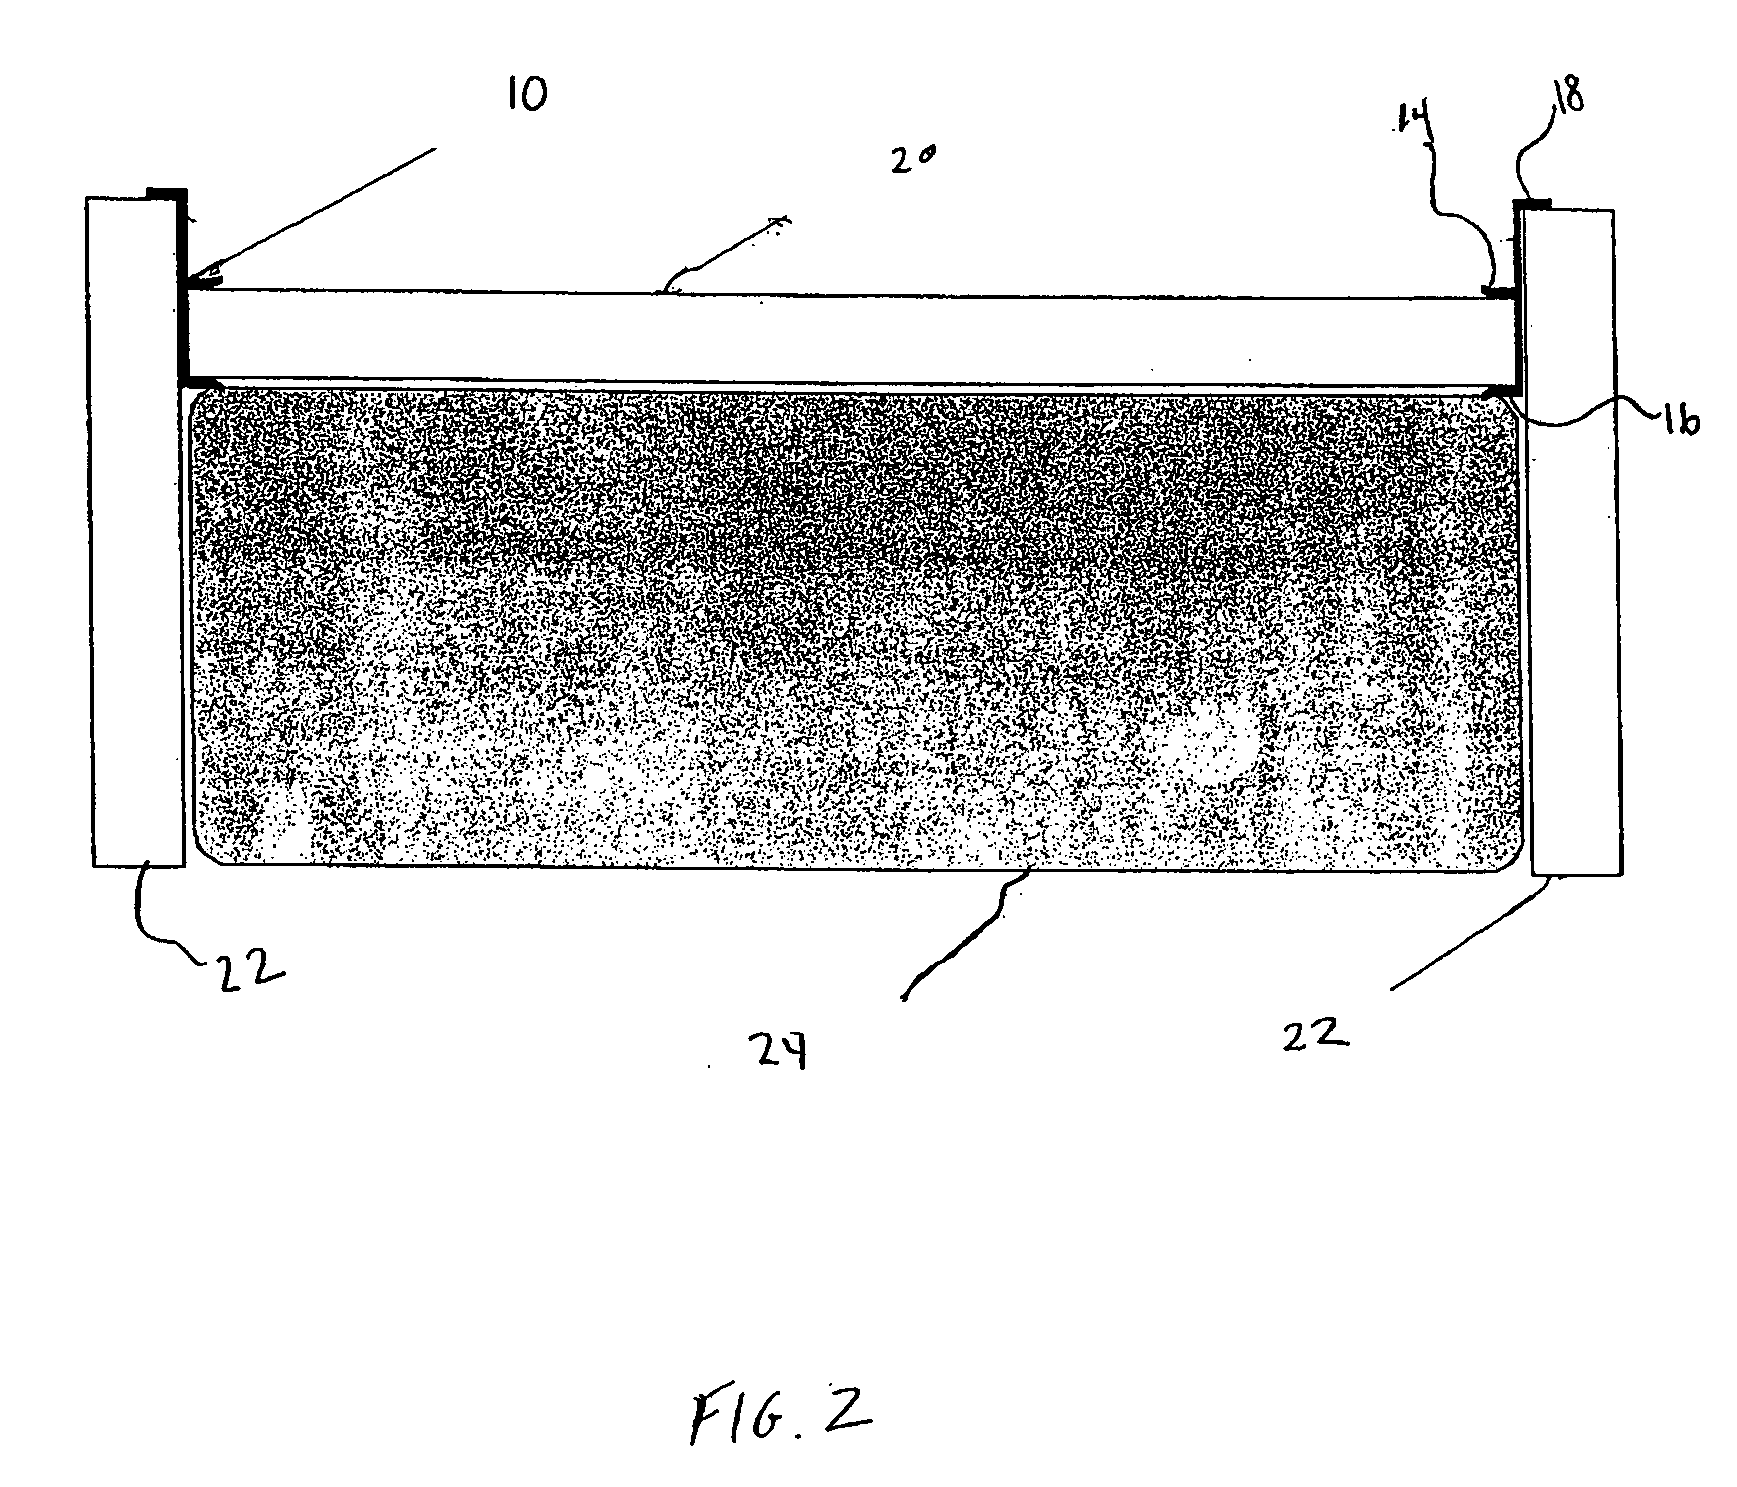 Apparatus, method and system for sealing and insulating ventilation space